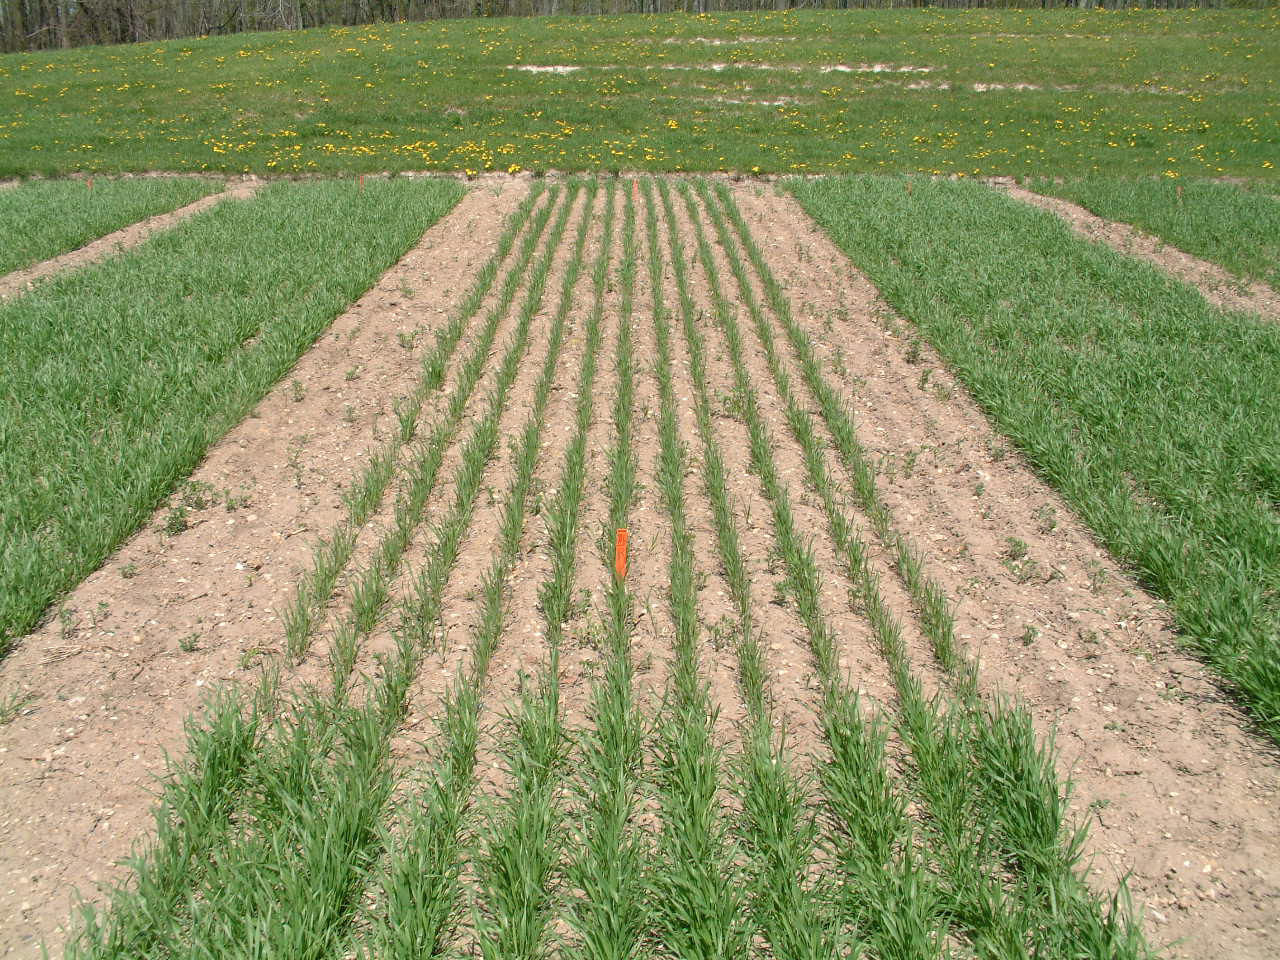 Winter wheat stunting following Group 2 pre-plant application.  Mode of Action: Acetolactate synthase (ALS) inhibitors.